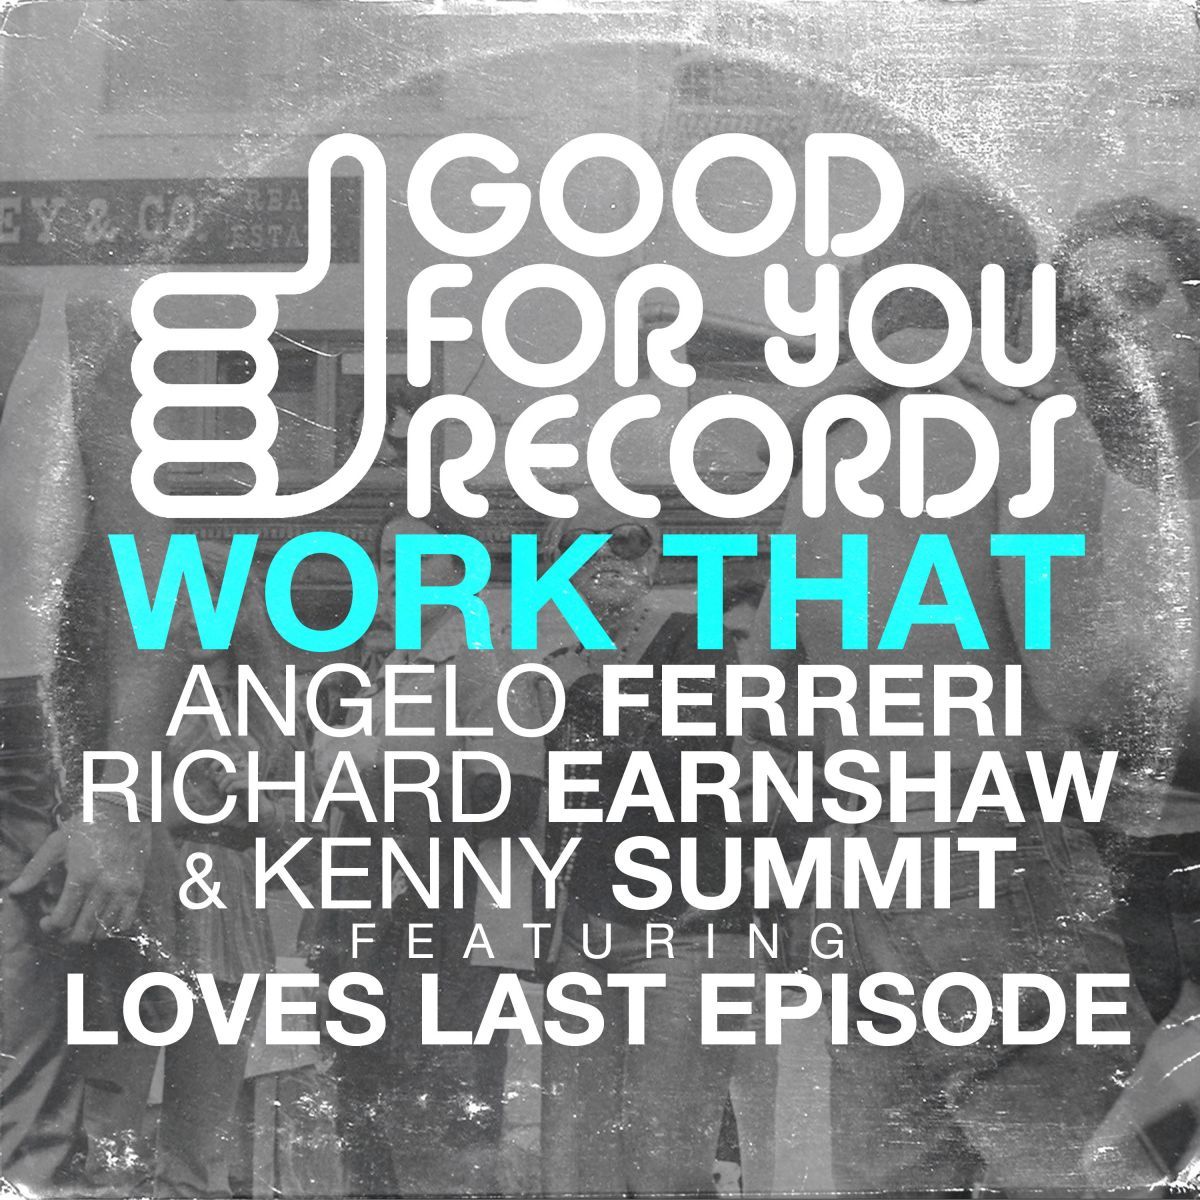 Angelo Ferreri, Richard Earnshaw & Kenny Summit feat. Loves Last Episode - Work That / Good For You Records